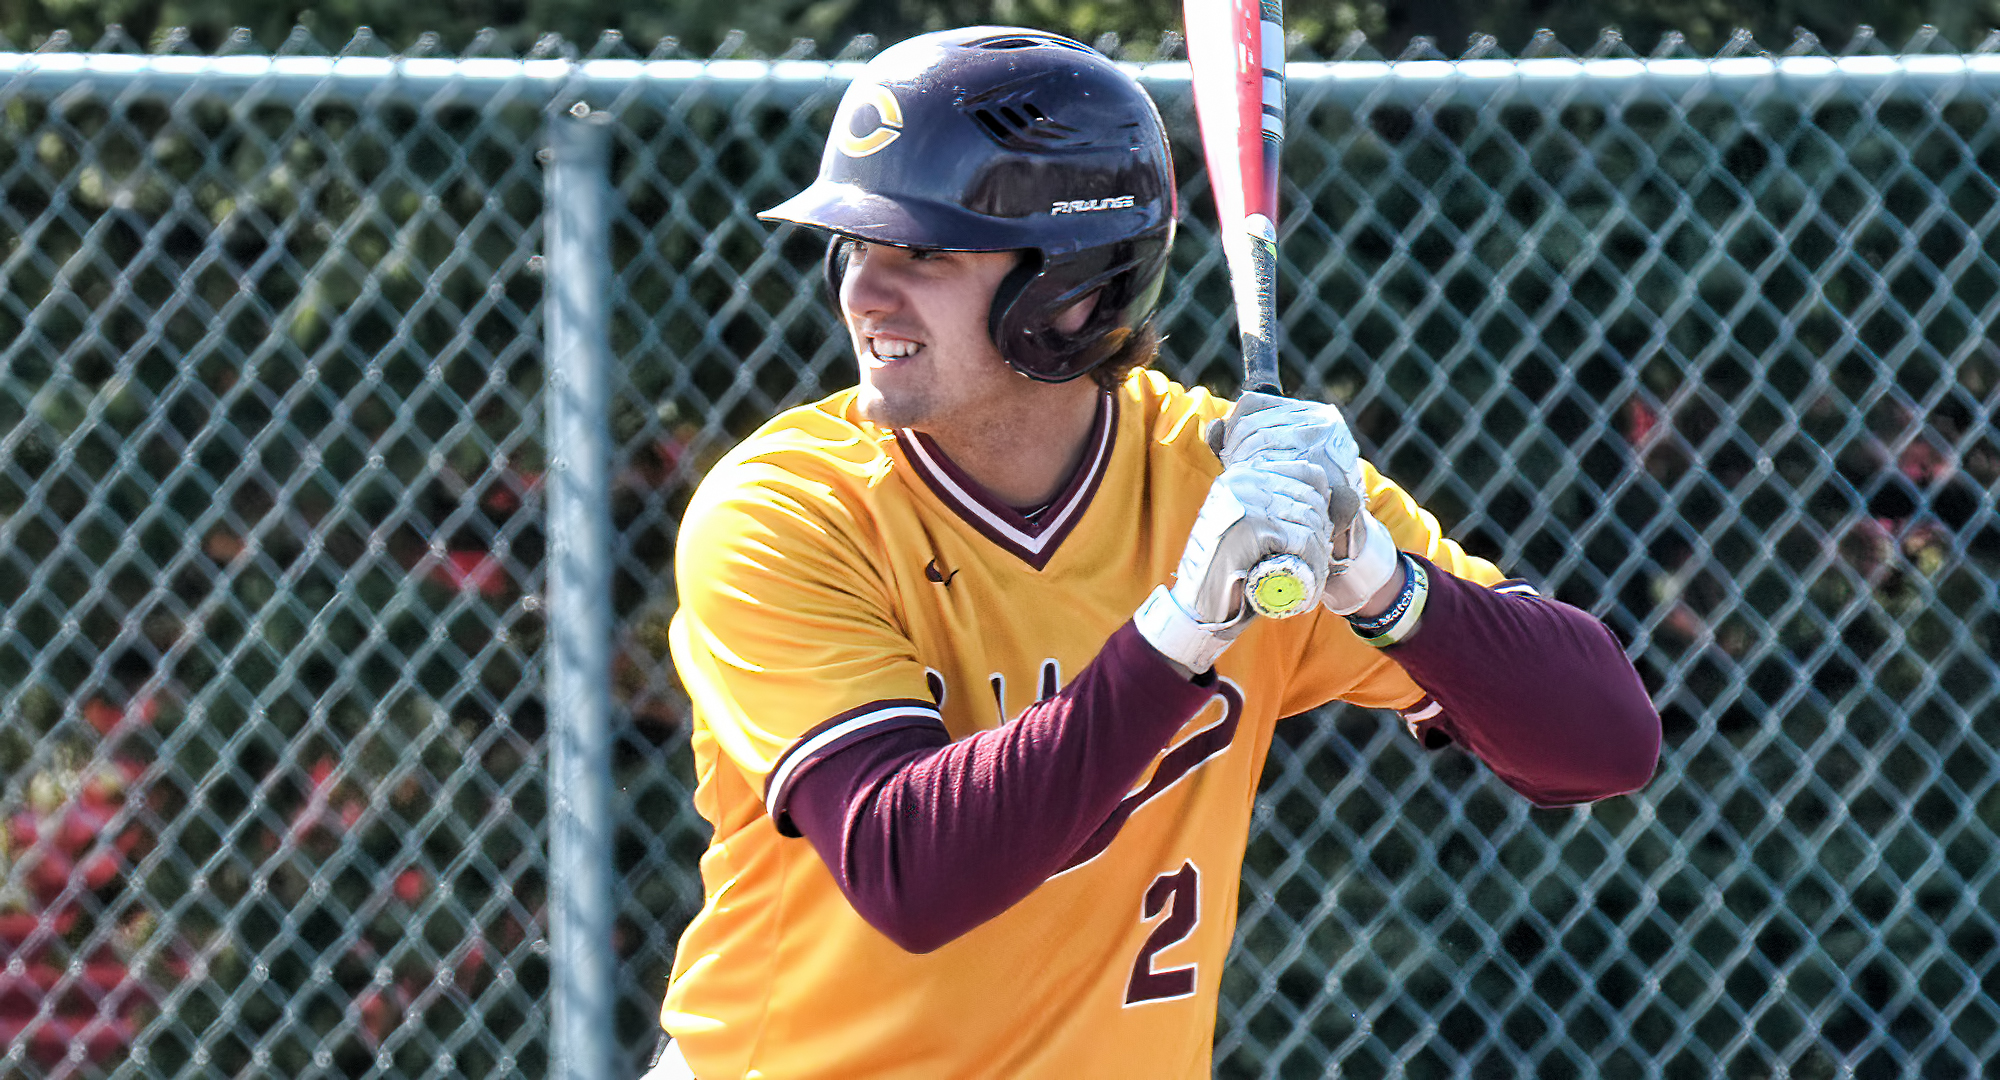 Matt Gruber went 2-for-3 in the Cobbers' 12-2 win over Gwynedd Mercy to become the 28th player in CC history to reach the 100-hit mark.